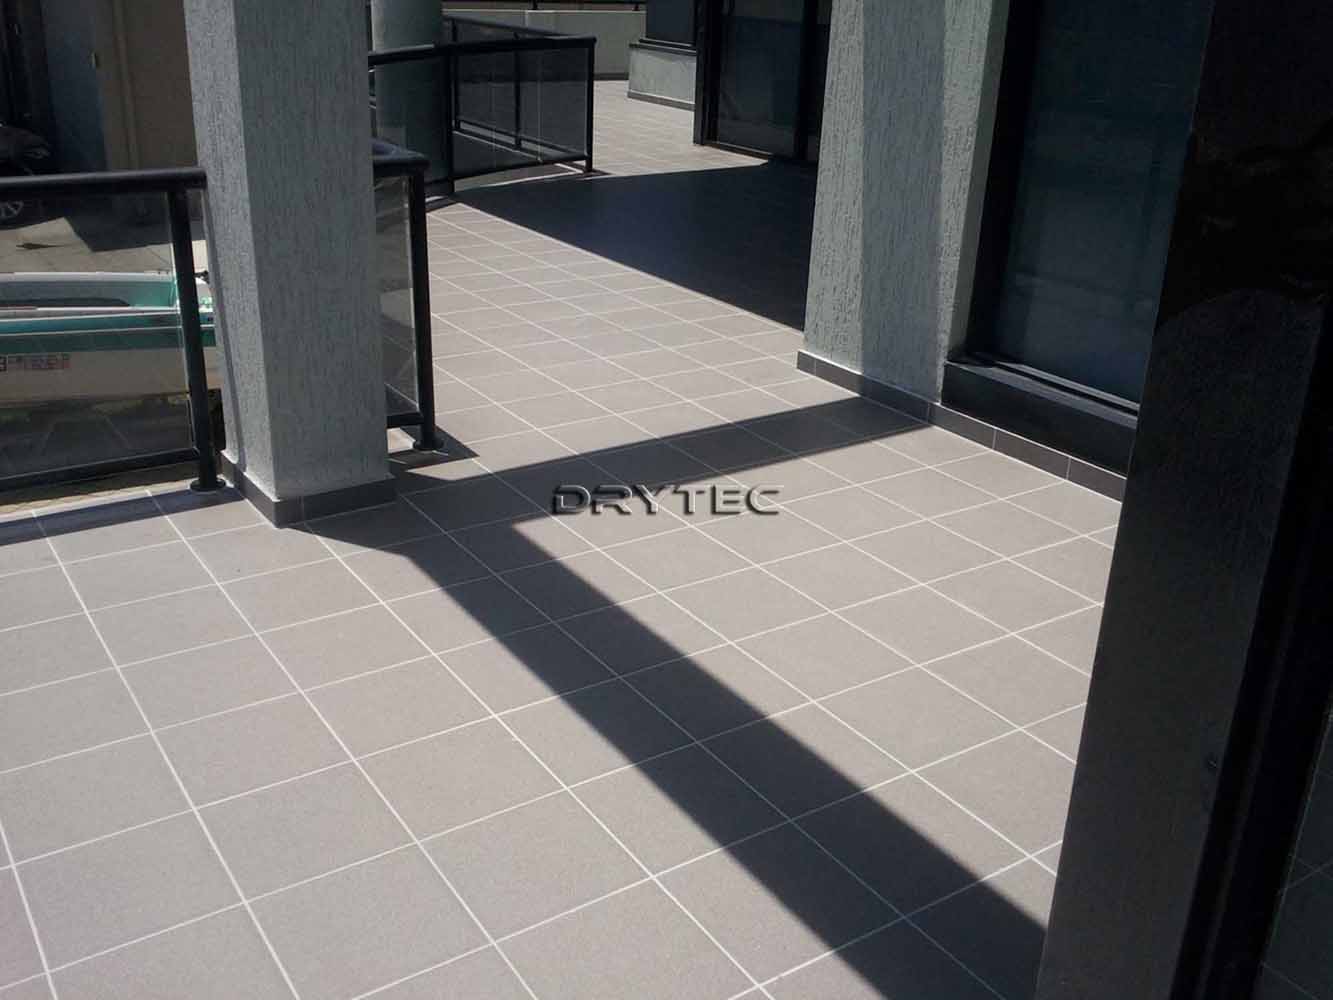 Leaking Balcony Repairs and Tile Regrouting Services in Perth WA